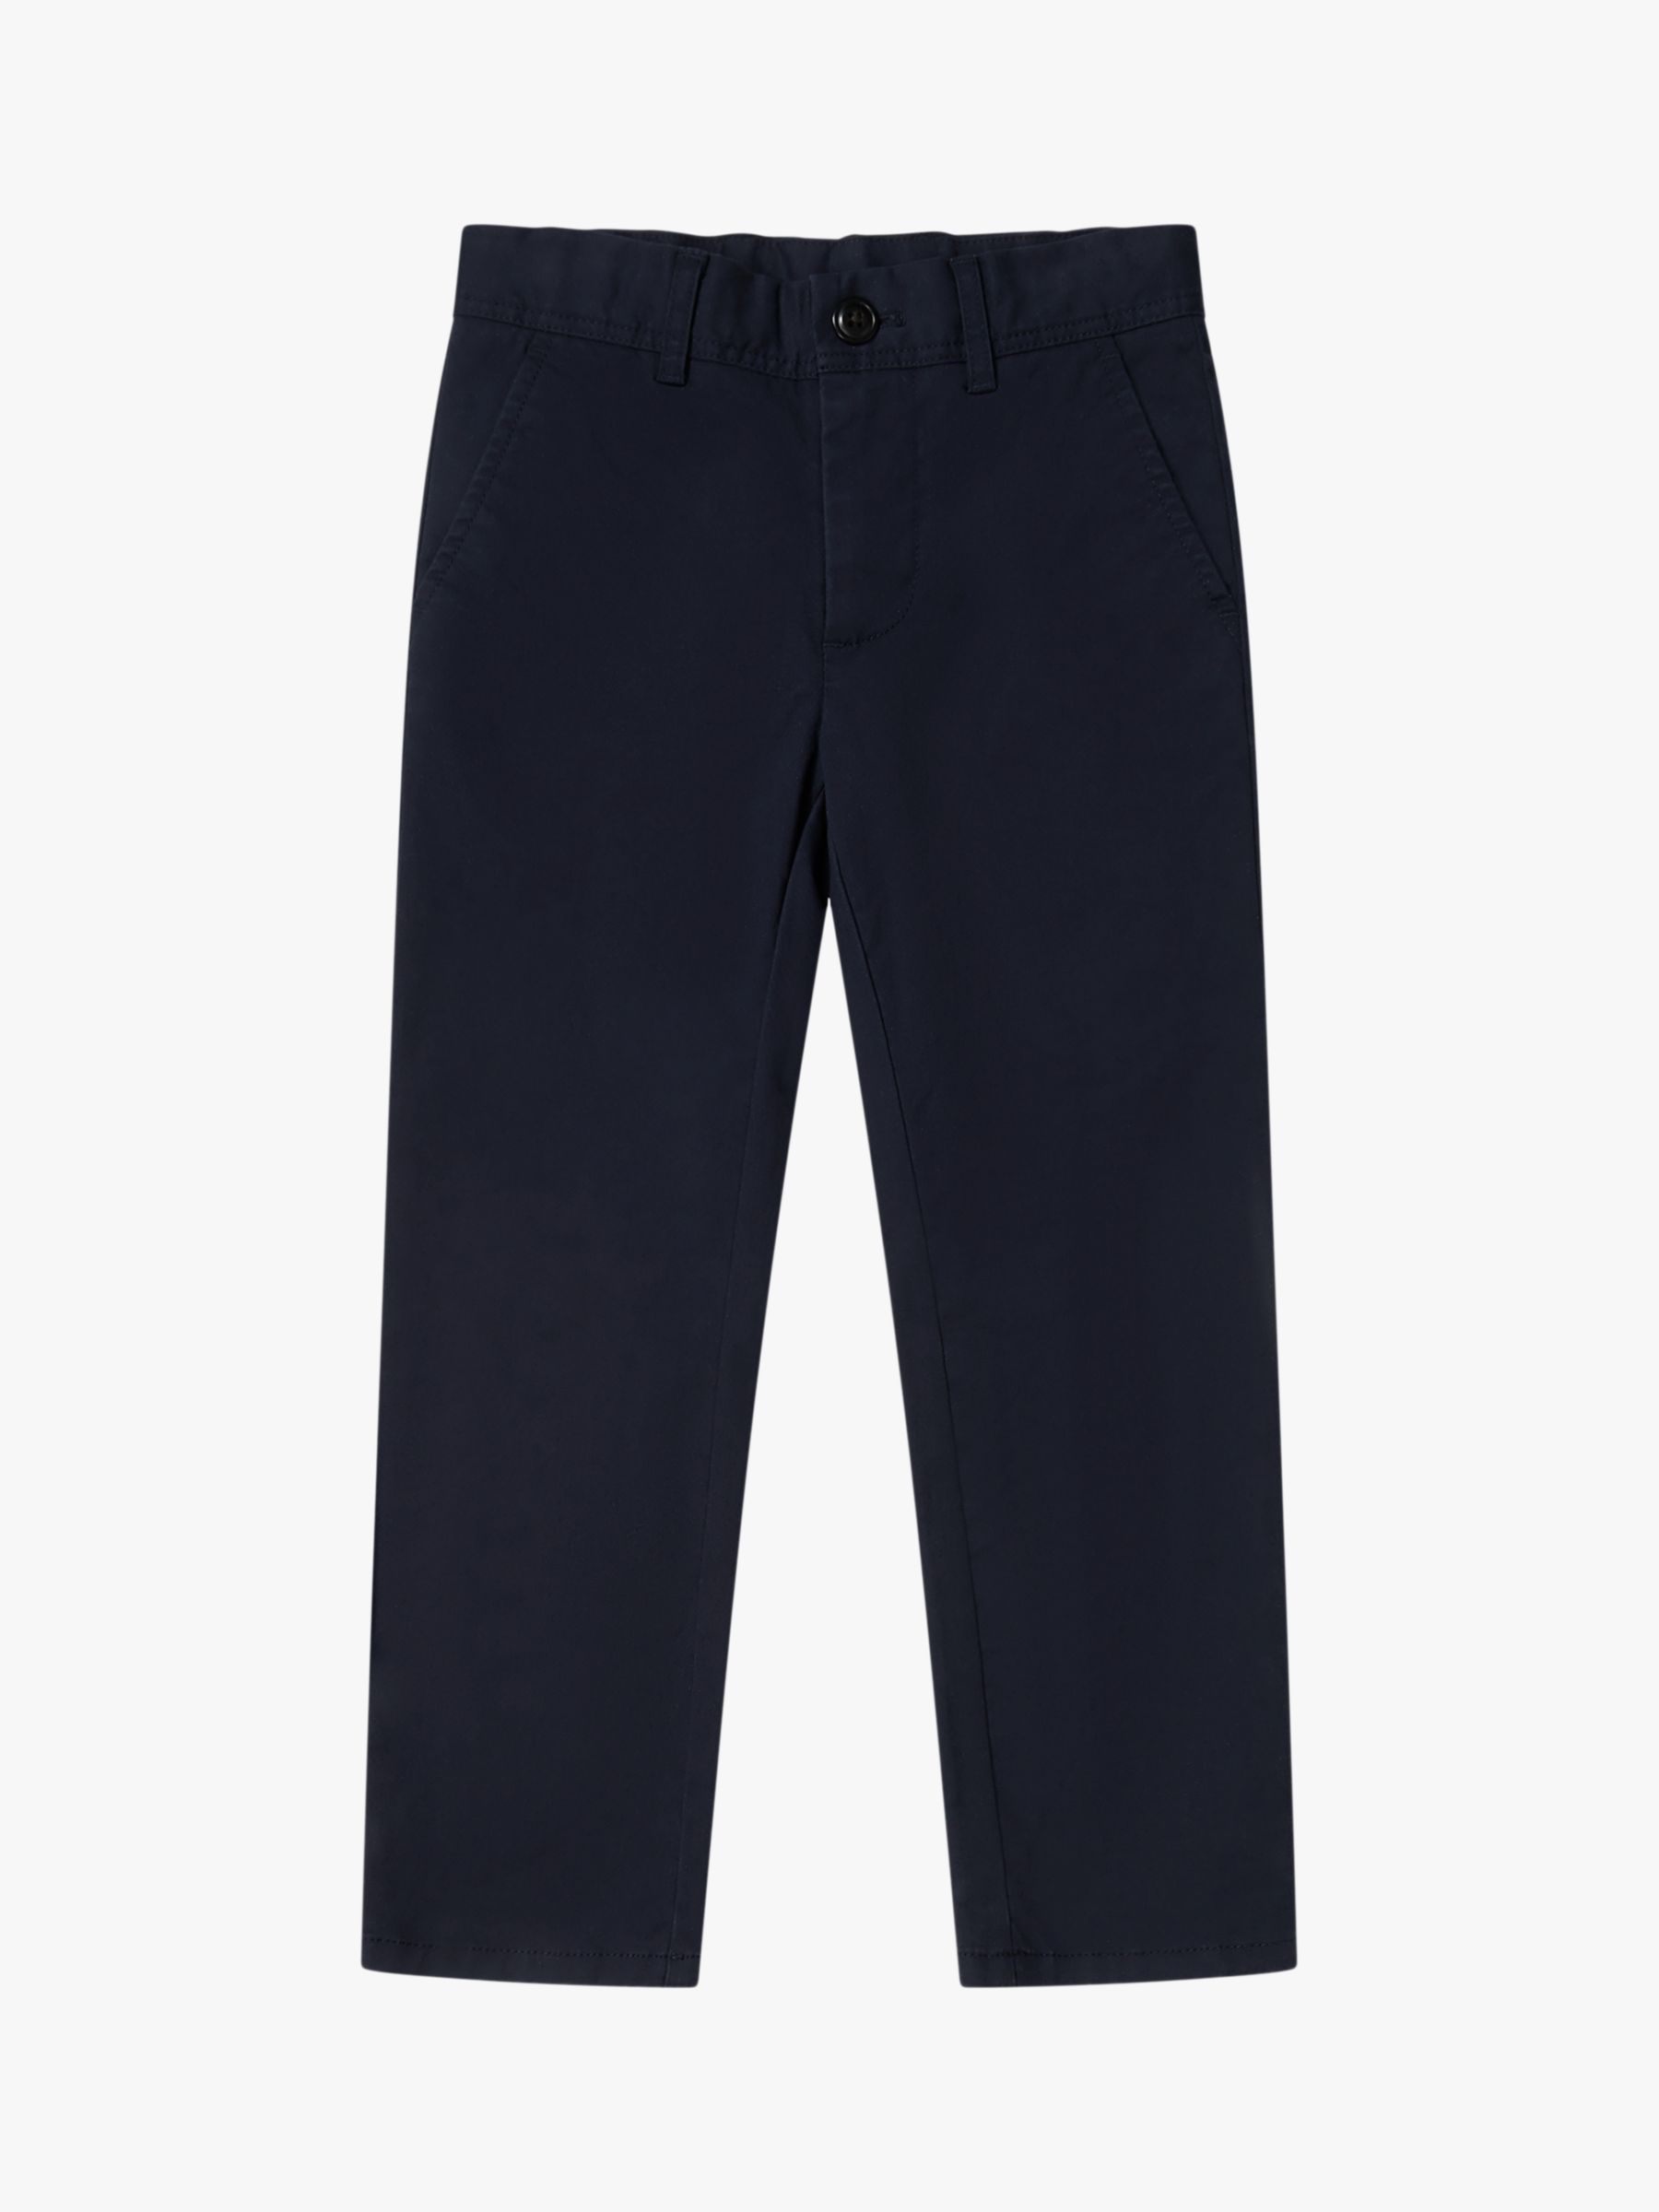 Reiss Kids' Pitch Slim Fit Chino Trousers, Navy, 4-5 years